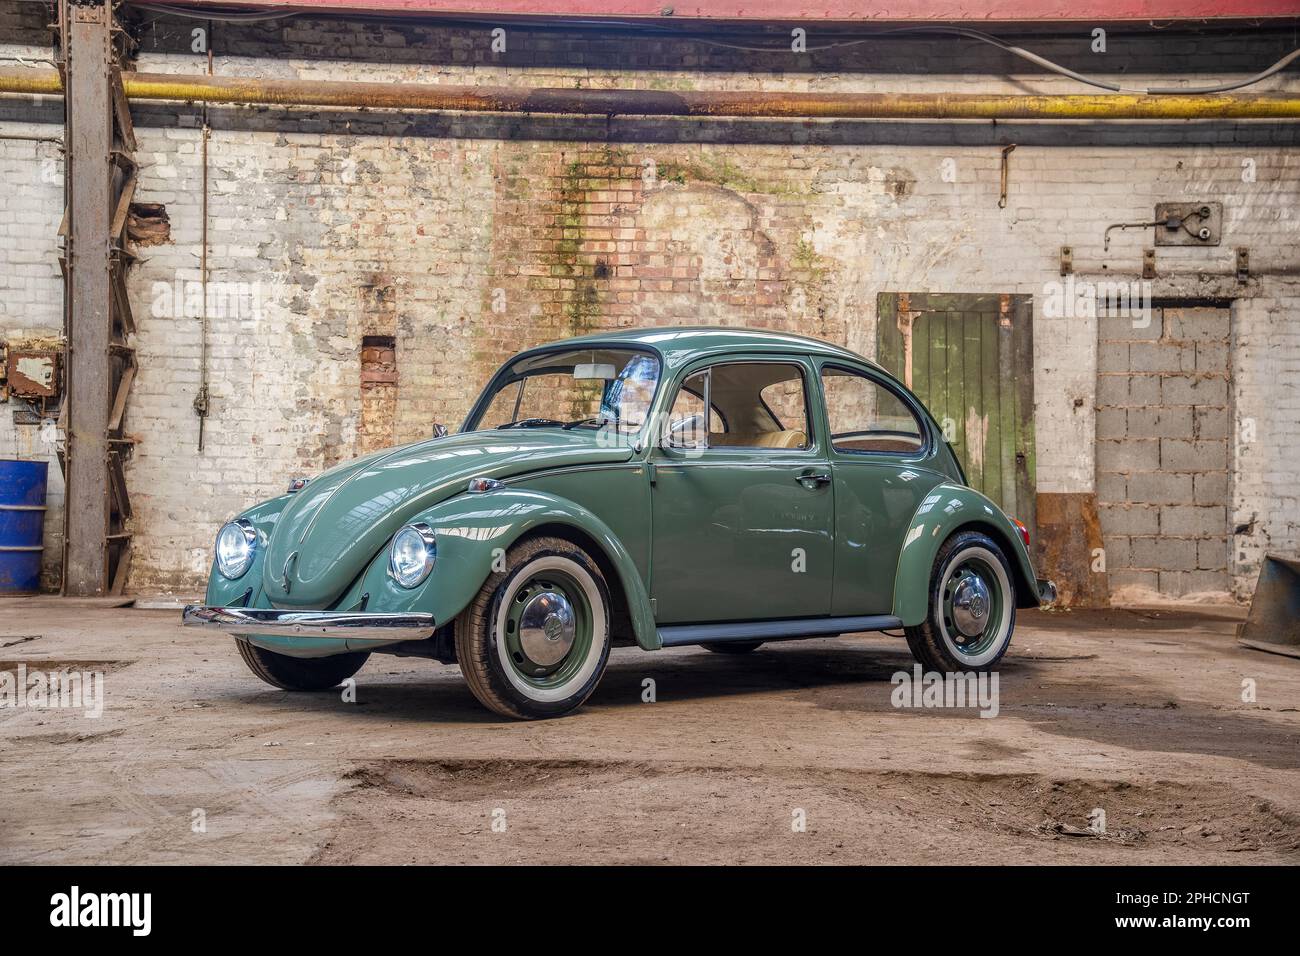 Green Volvkswagen Beetle with white walled tyres parked in an old engineering works Stock Photo